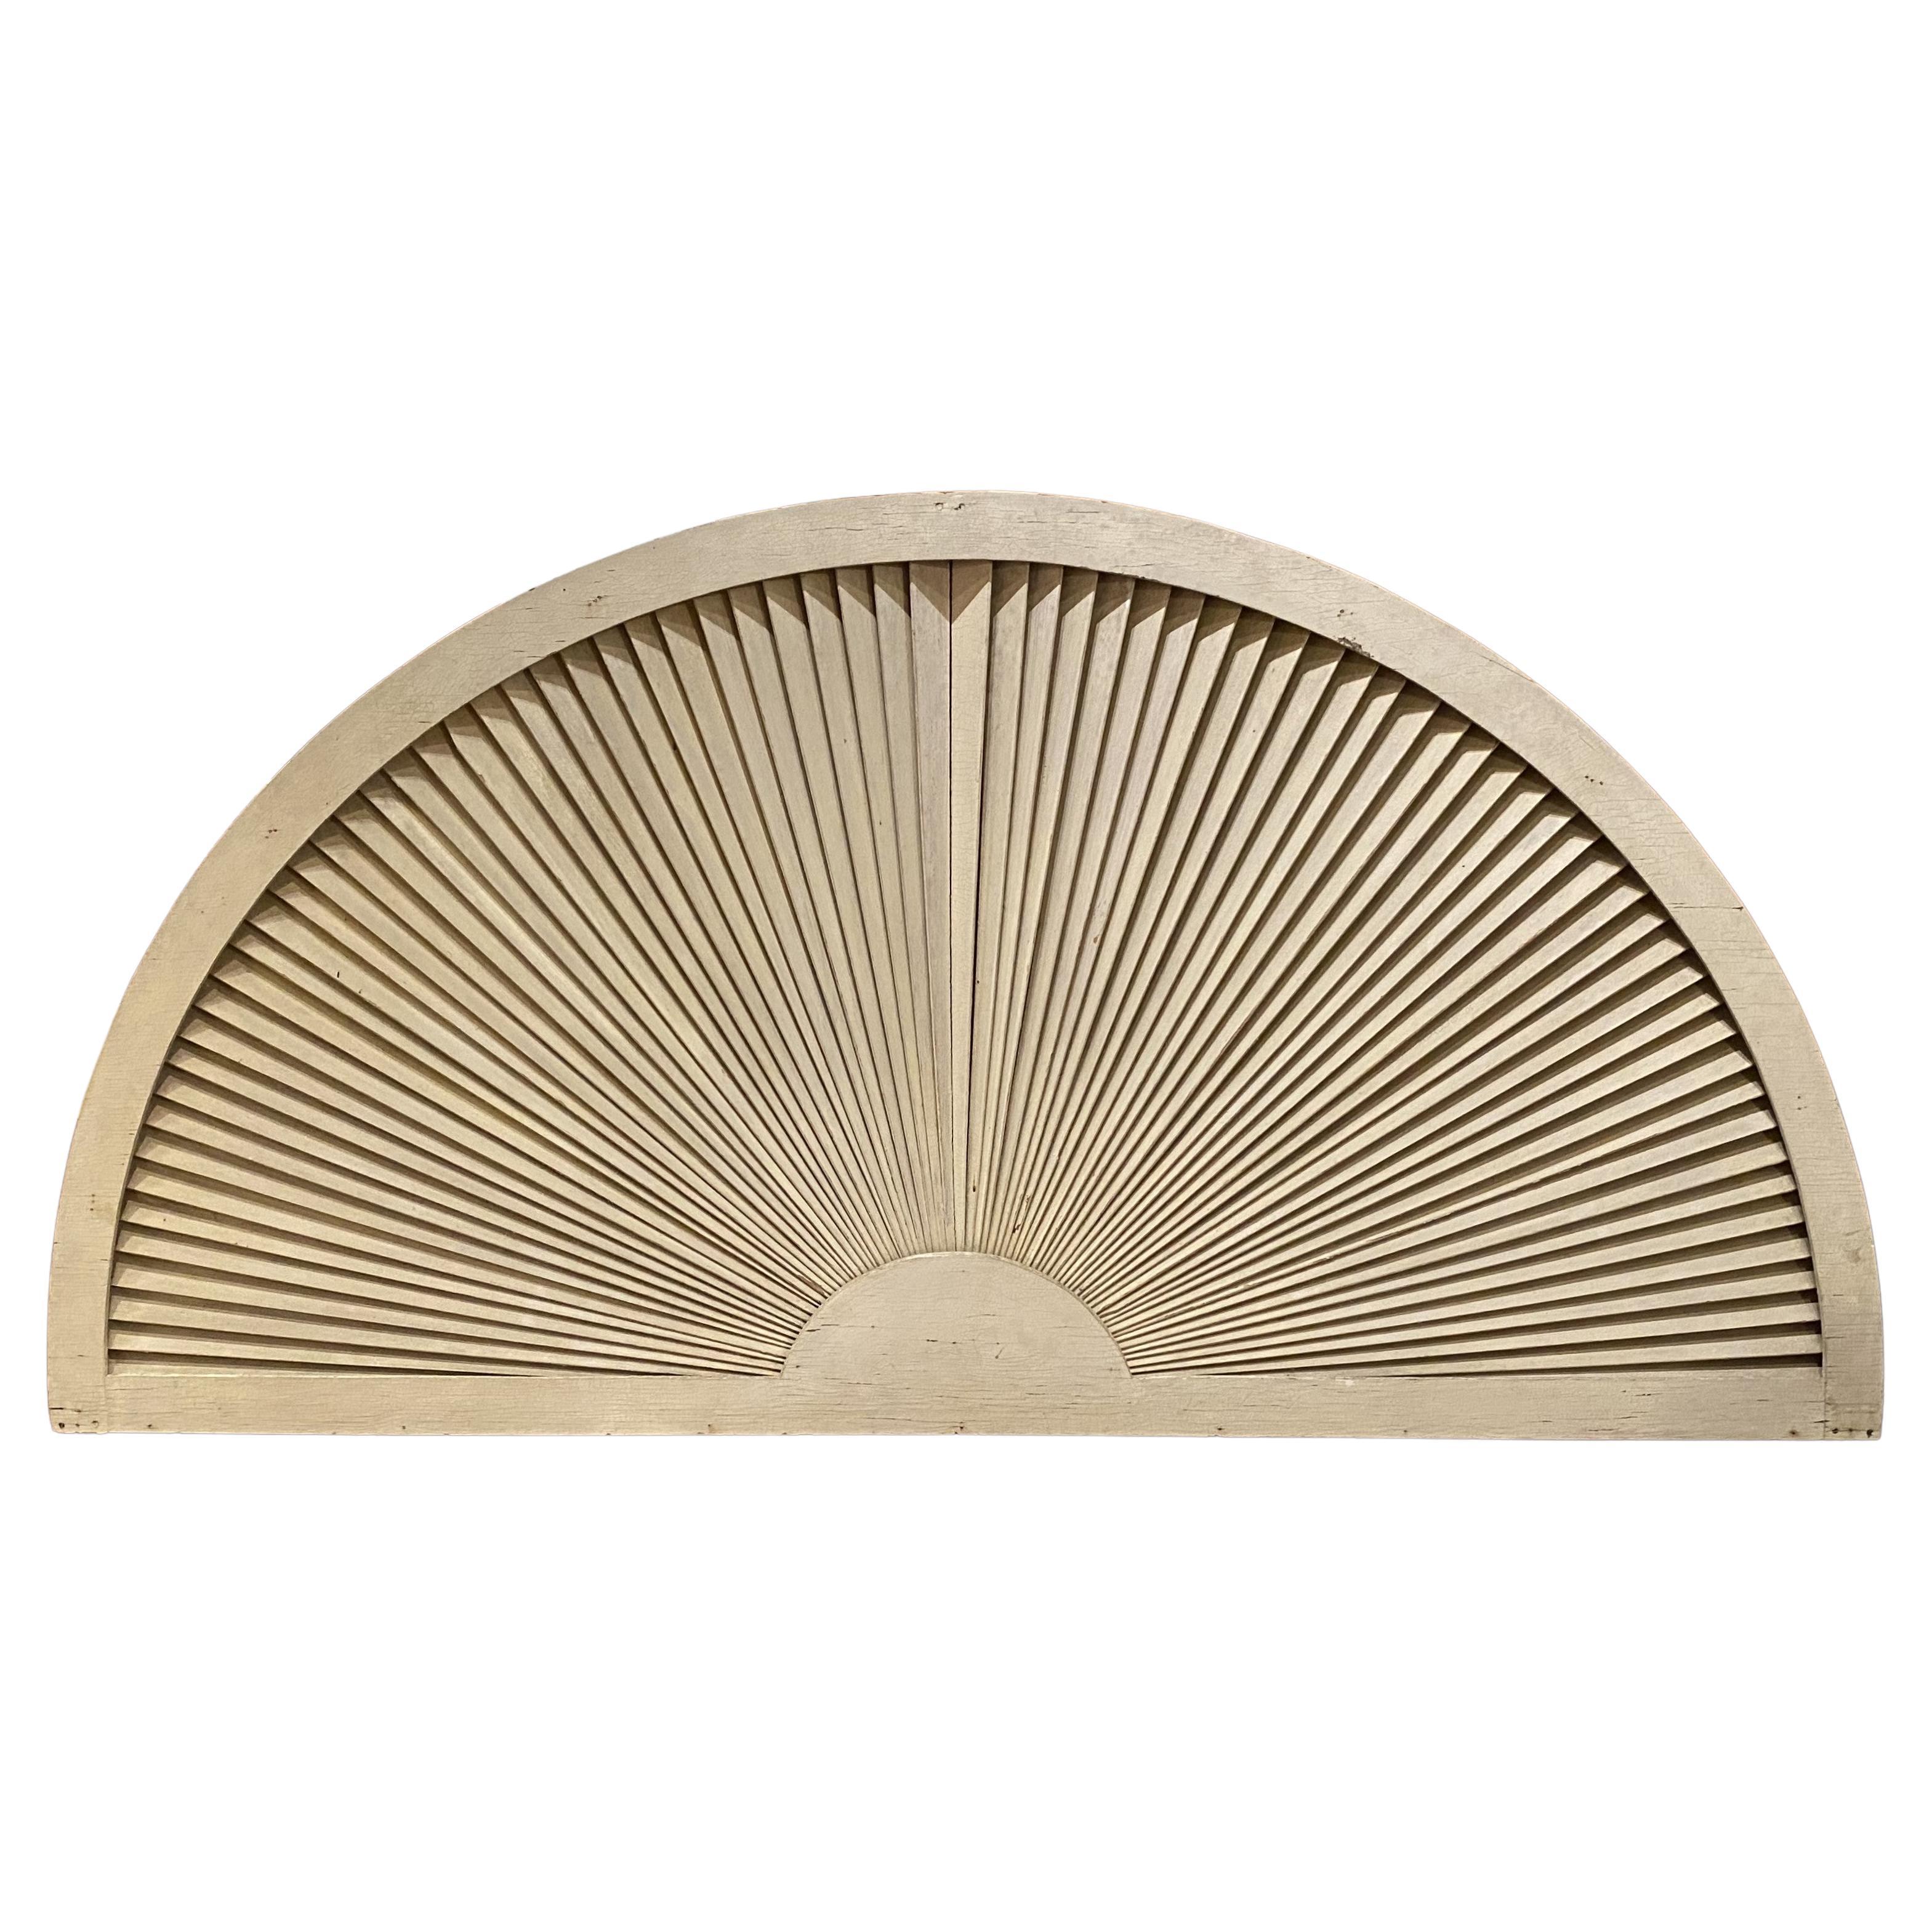 Architectural Wooden Fan Form Element in Old White Paint